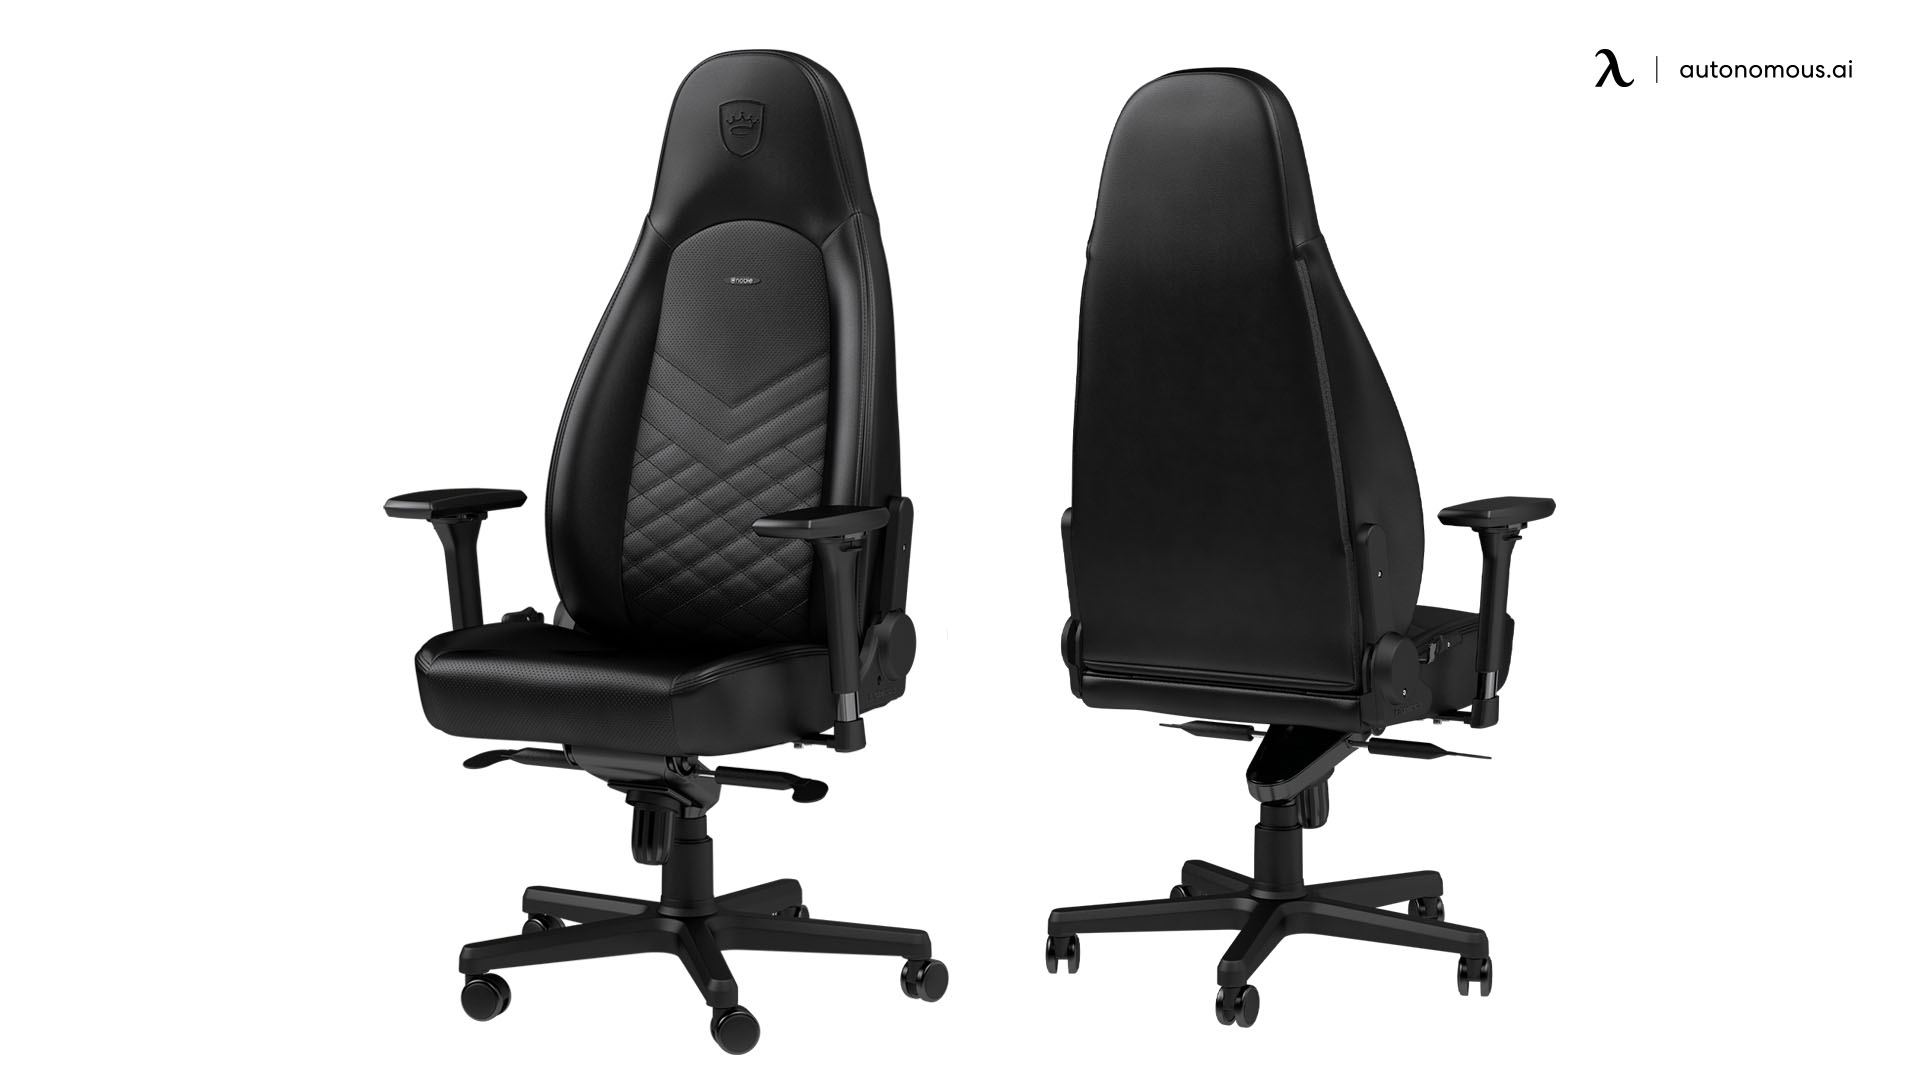 ICON Black Gaming streamer chair Manufactured